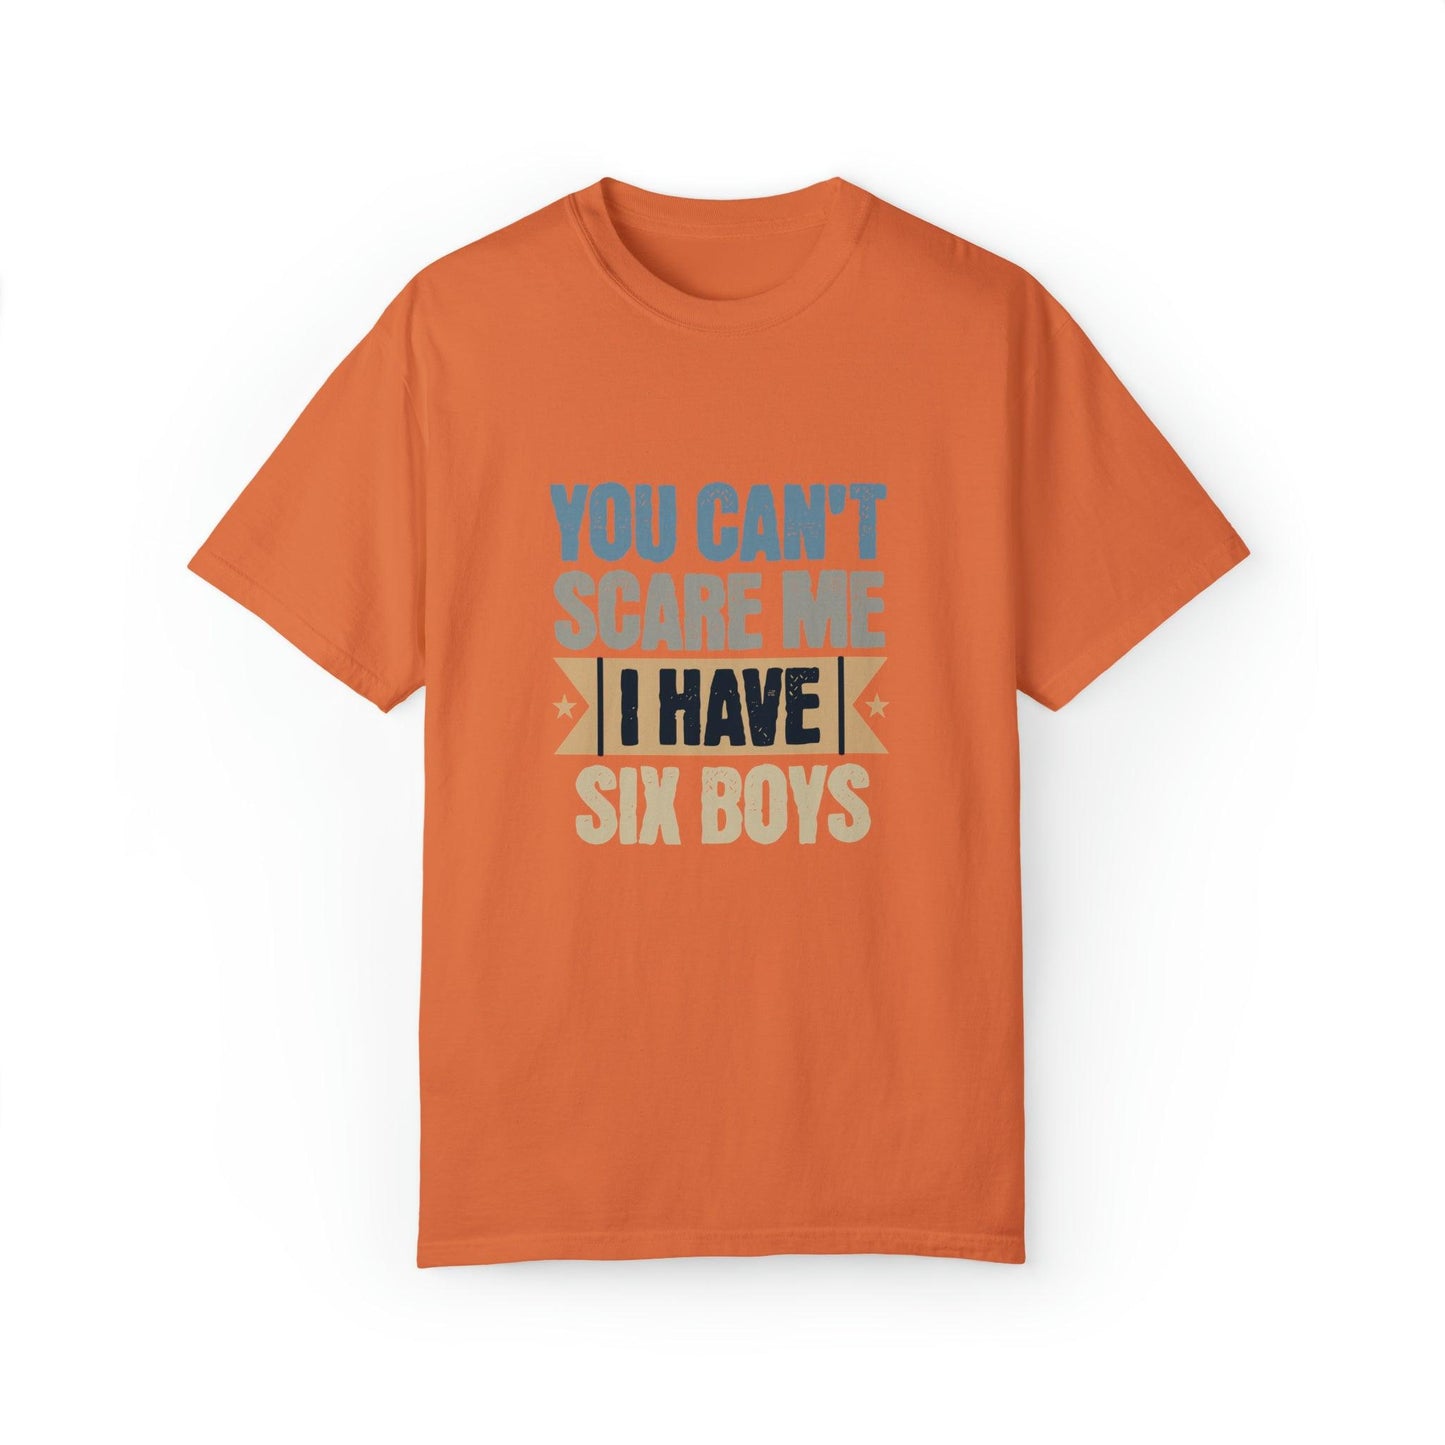 You Can't Scare Me, I Have 6 Boys: Proud Mama T-Shirt - Pandaize